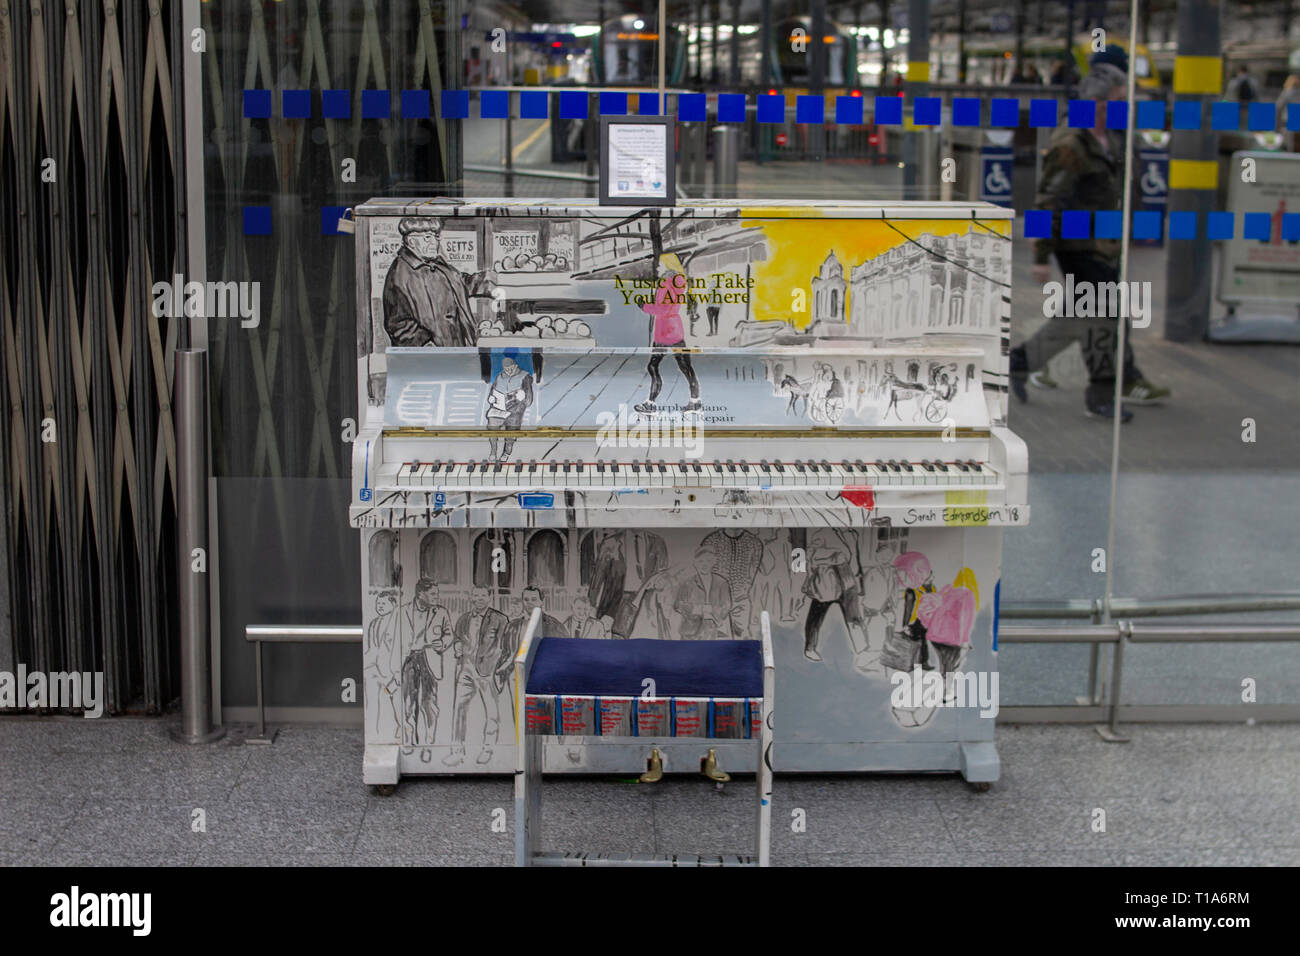 A piano placed inside Heuston Railway Station encouraging passengers to play some music while waiting for the train Stock Photo